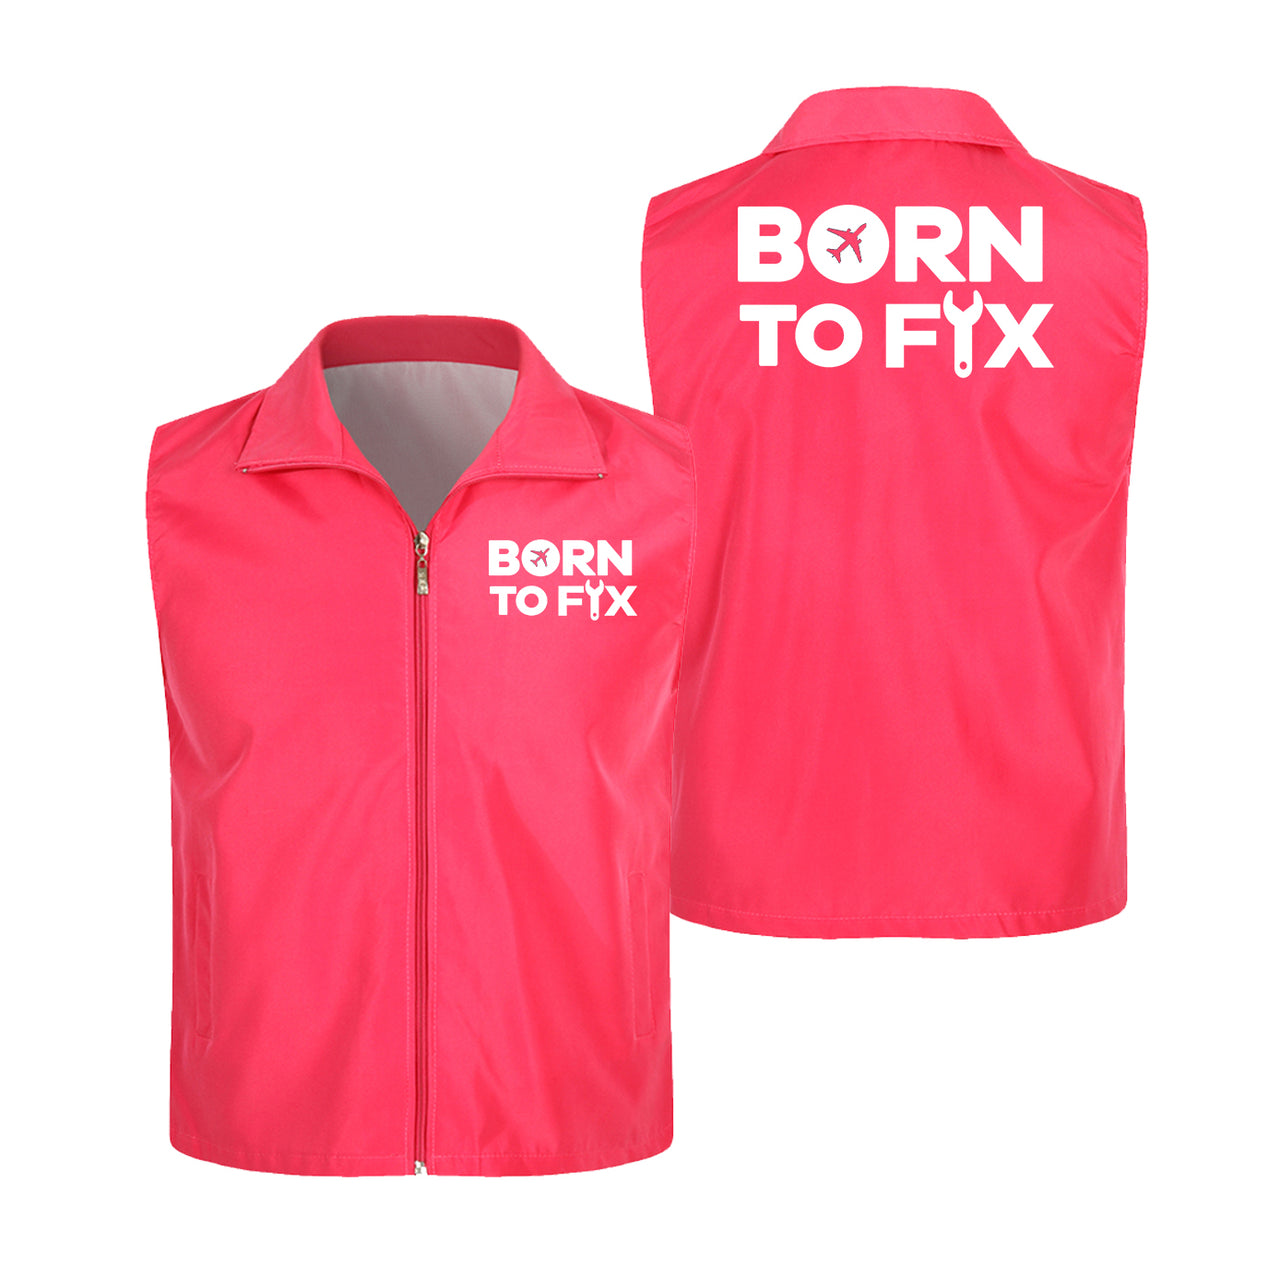 Born To Fix Airplanes Designed Thin Style Vests